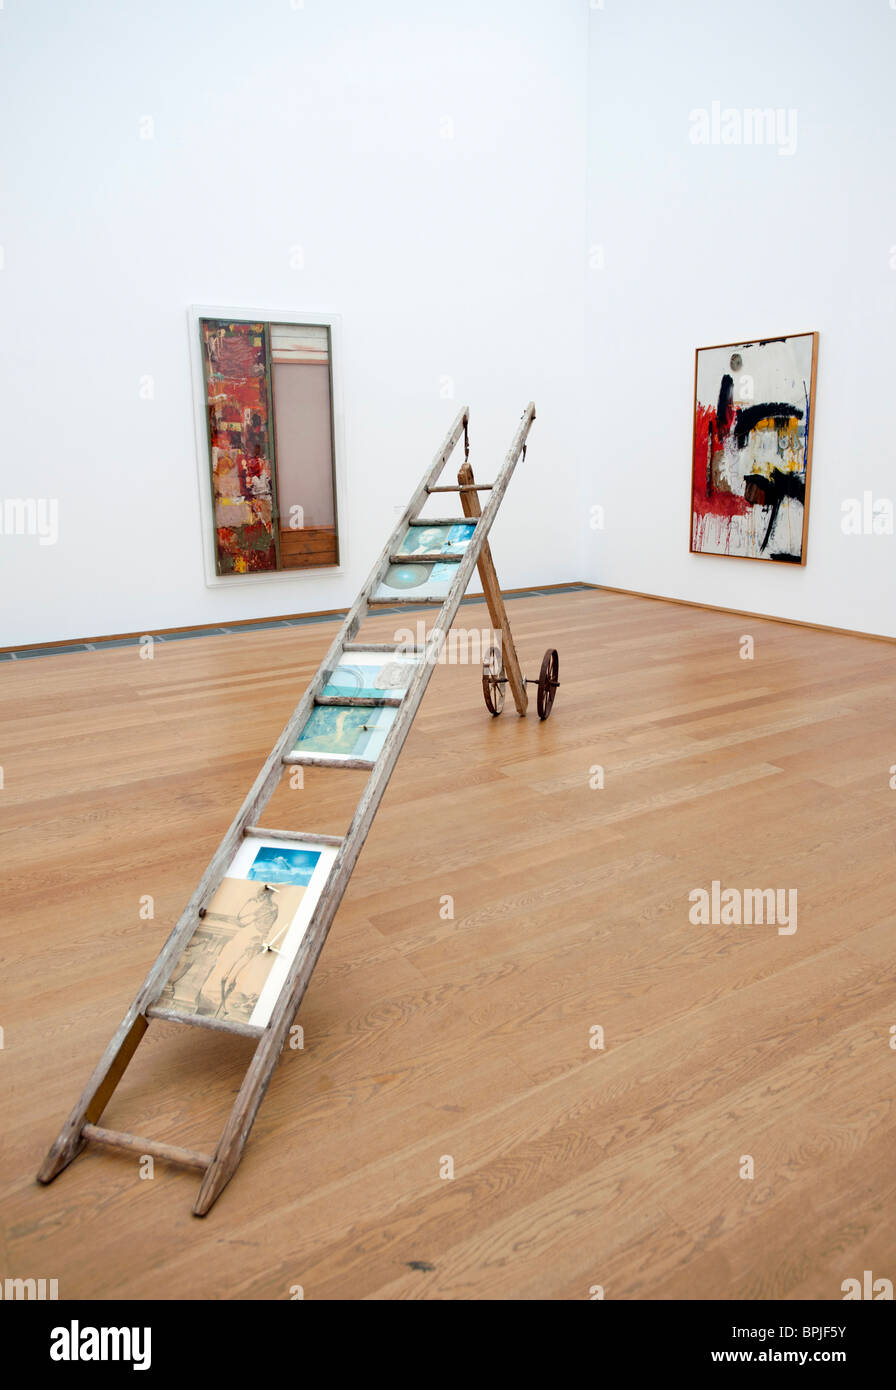 Paintings and sculpture by Robert Rauschenberg at Hamburger Bahnhof Museum of Contemporary Art in Berlin Germany Stock Photo